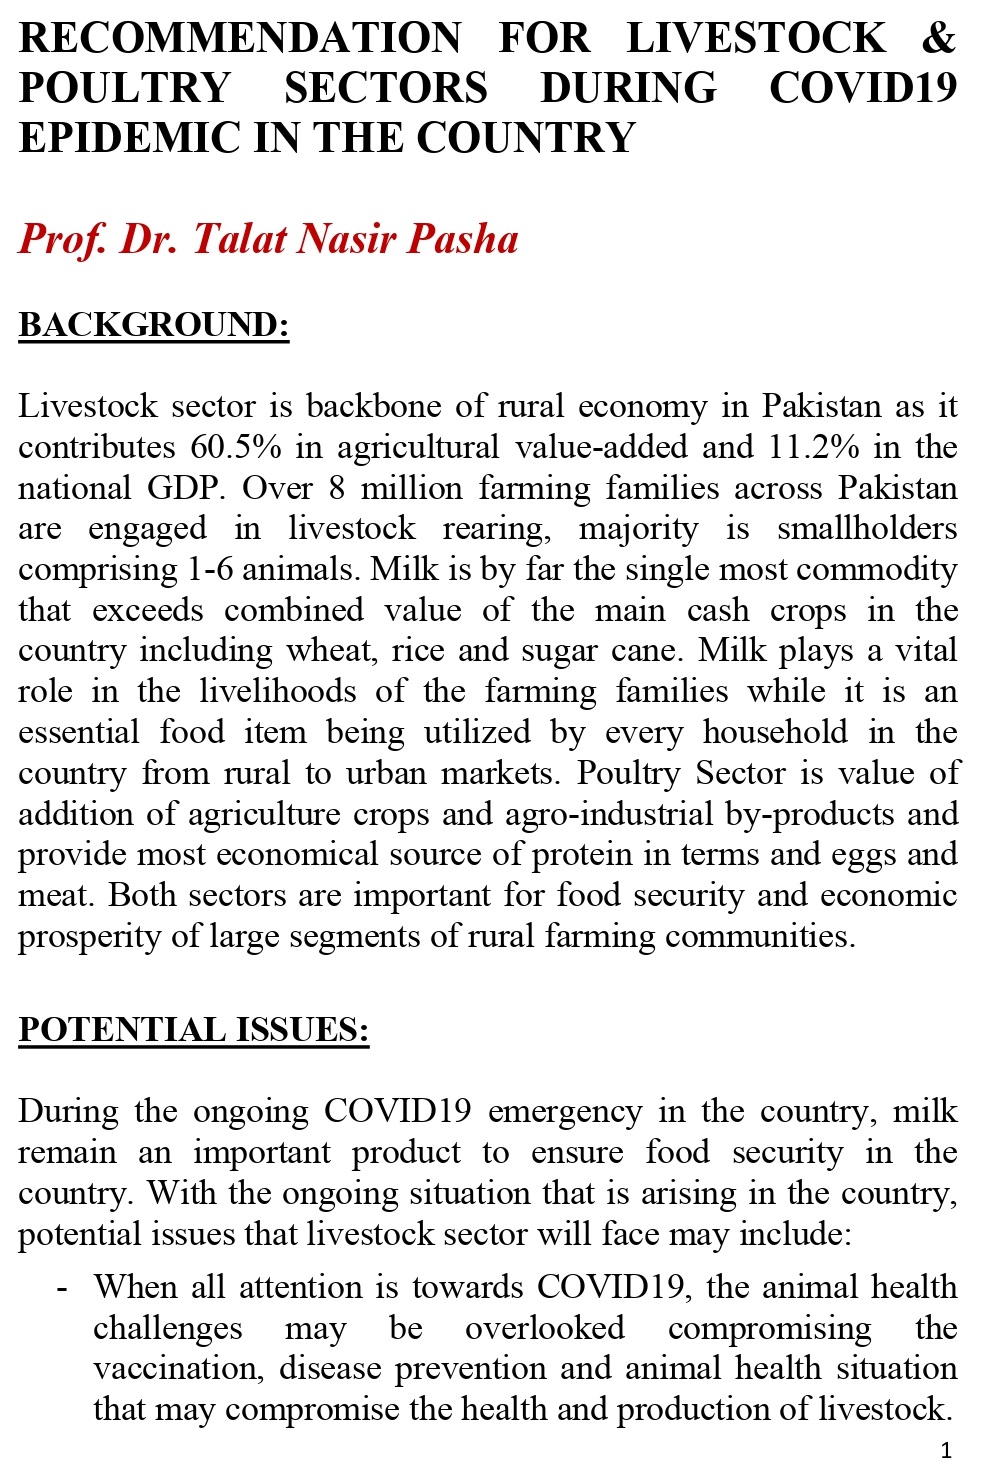 CORONA VIRUS AND LIVESTOCK. RECOMMENDATION FOR LIVESTOCK & POULTRY SECTORS DURING COVID19